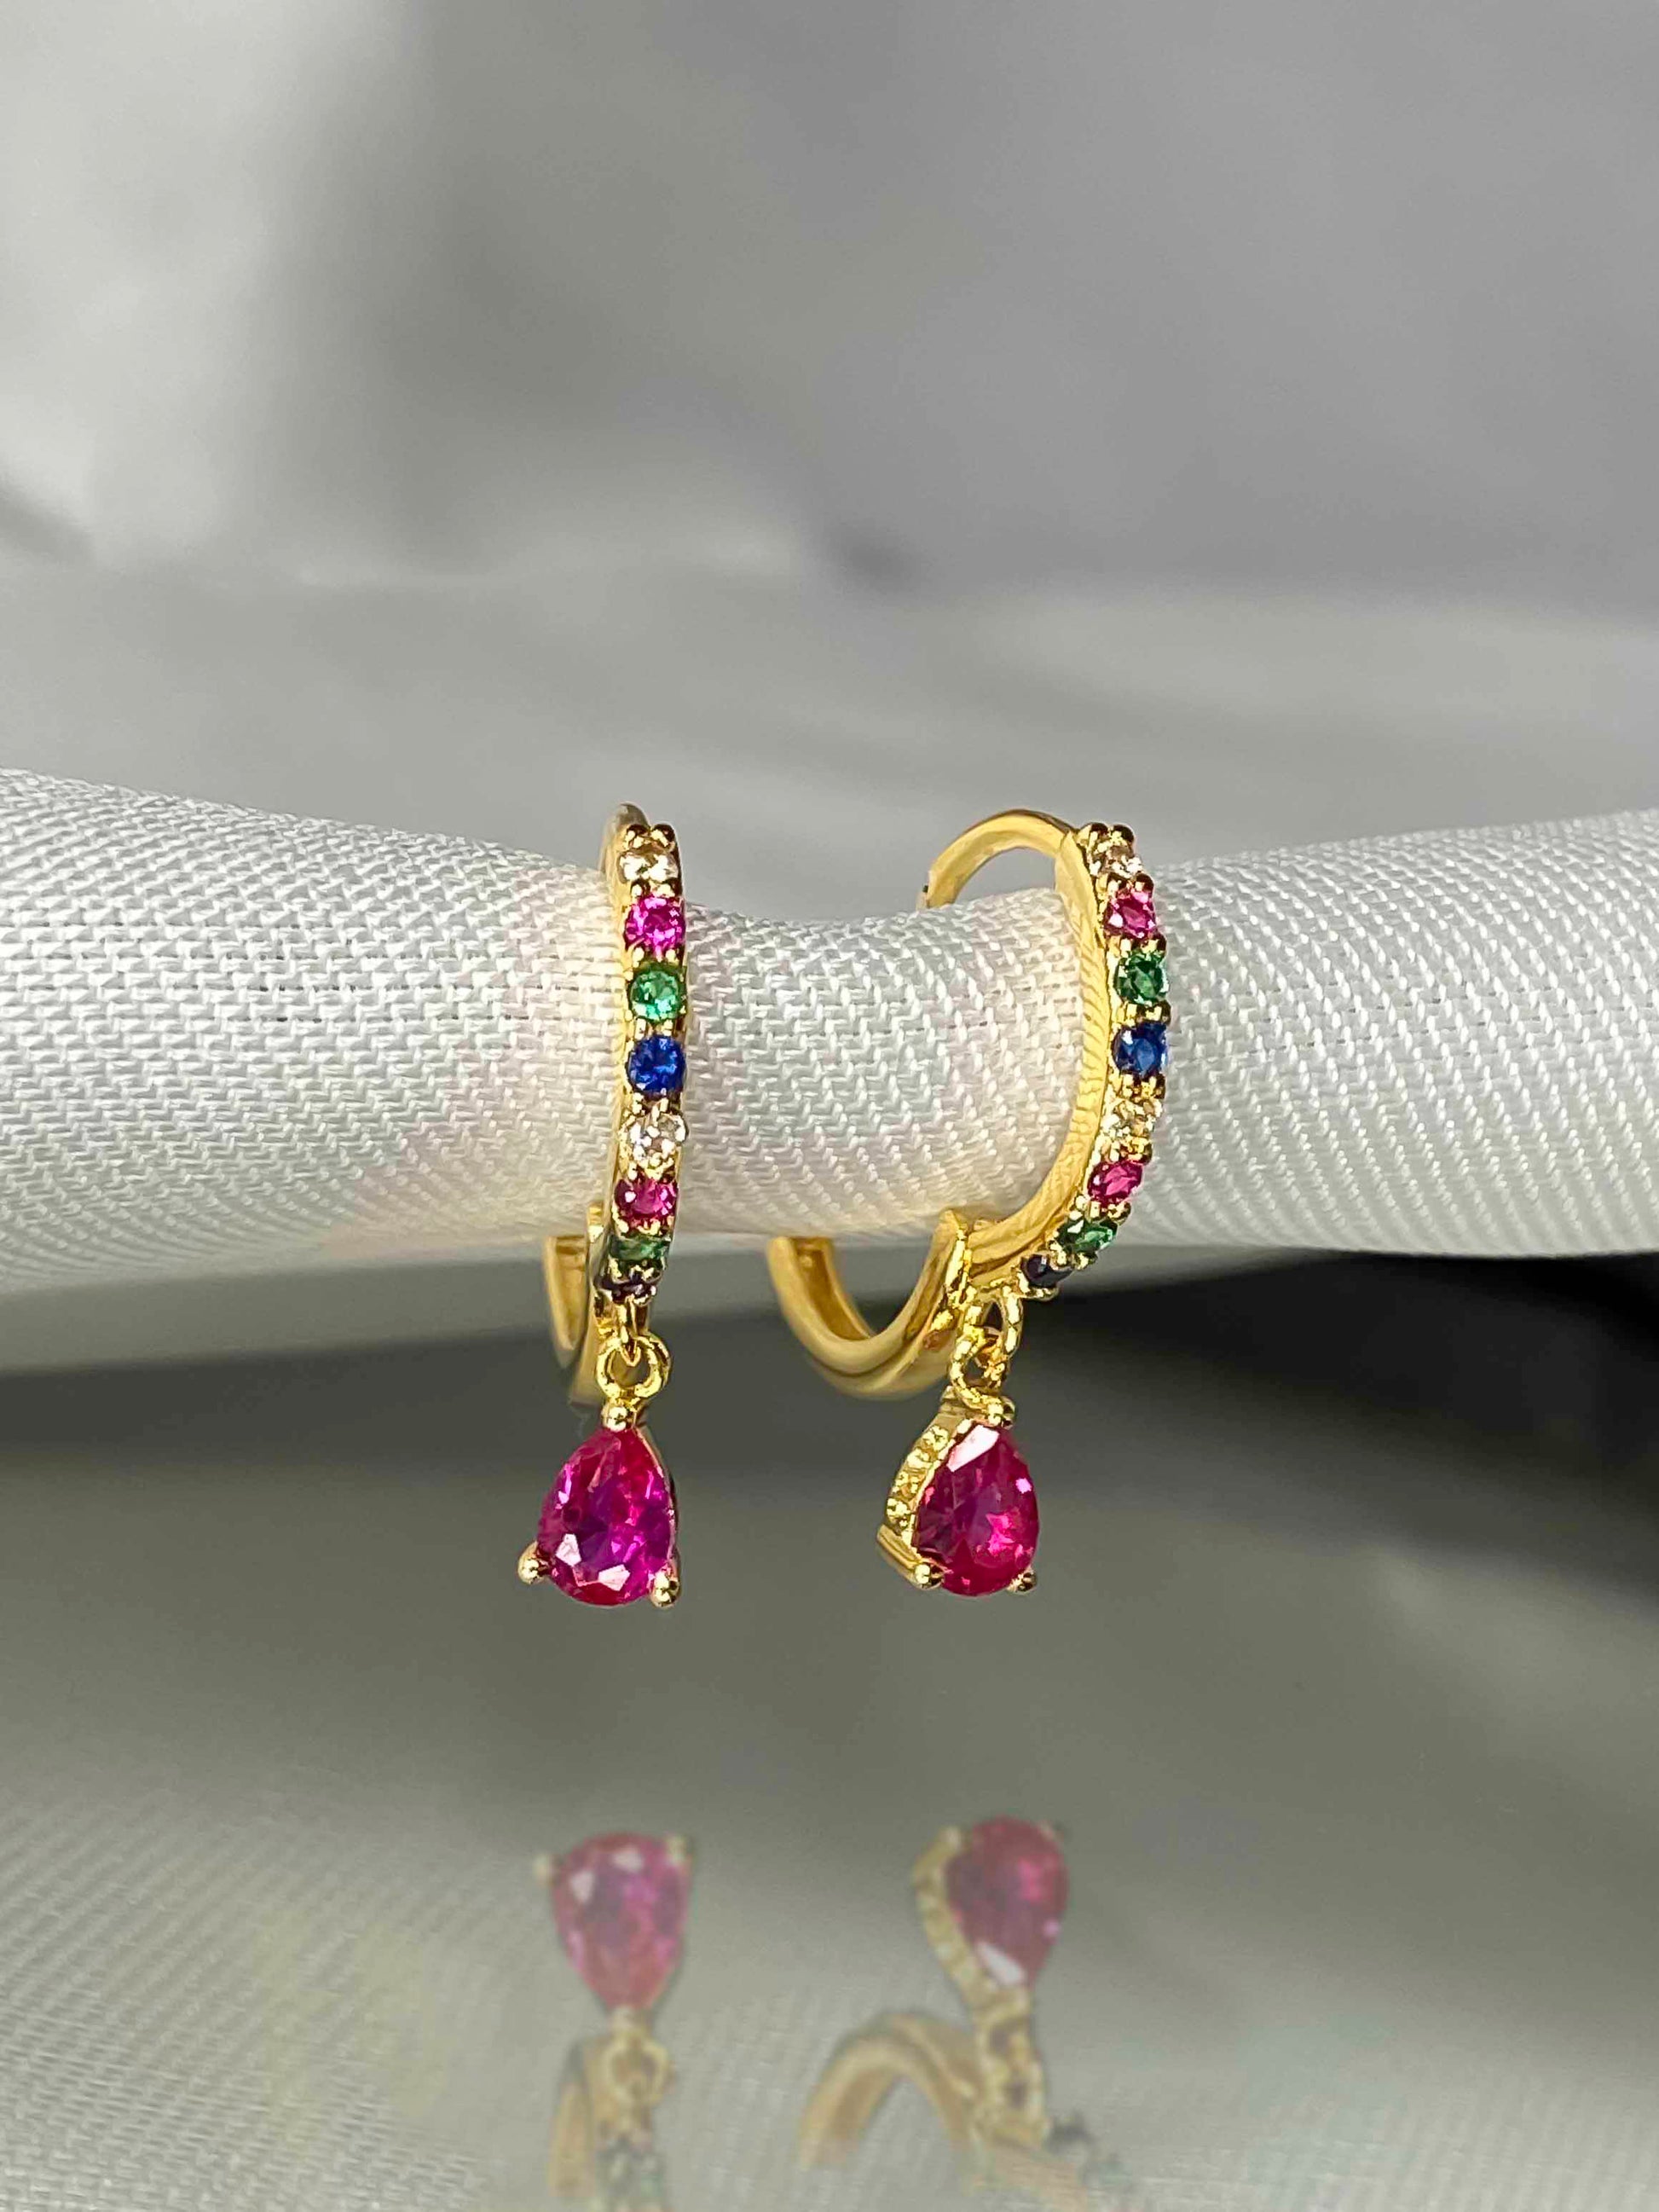  925 gold-plated sterling silver huggie hoop earrings with multicolored zirconia stones. 